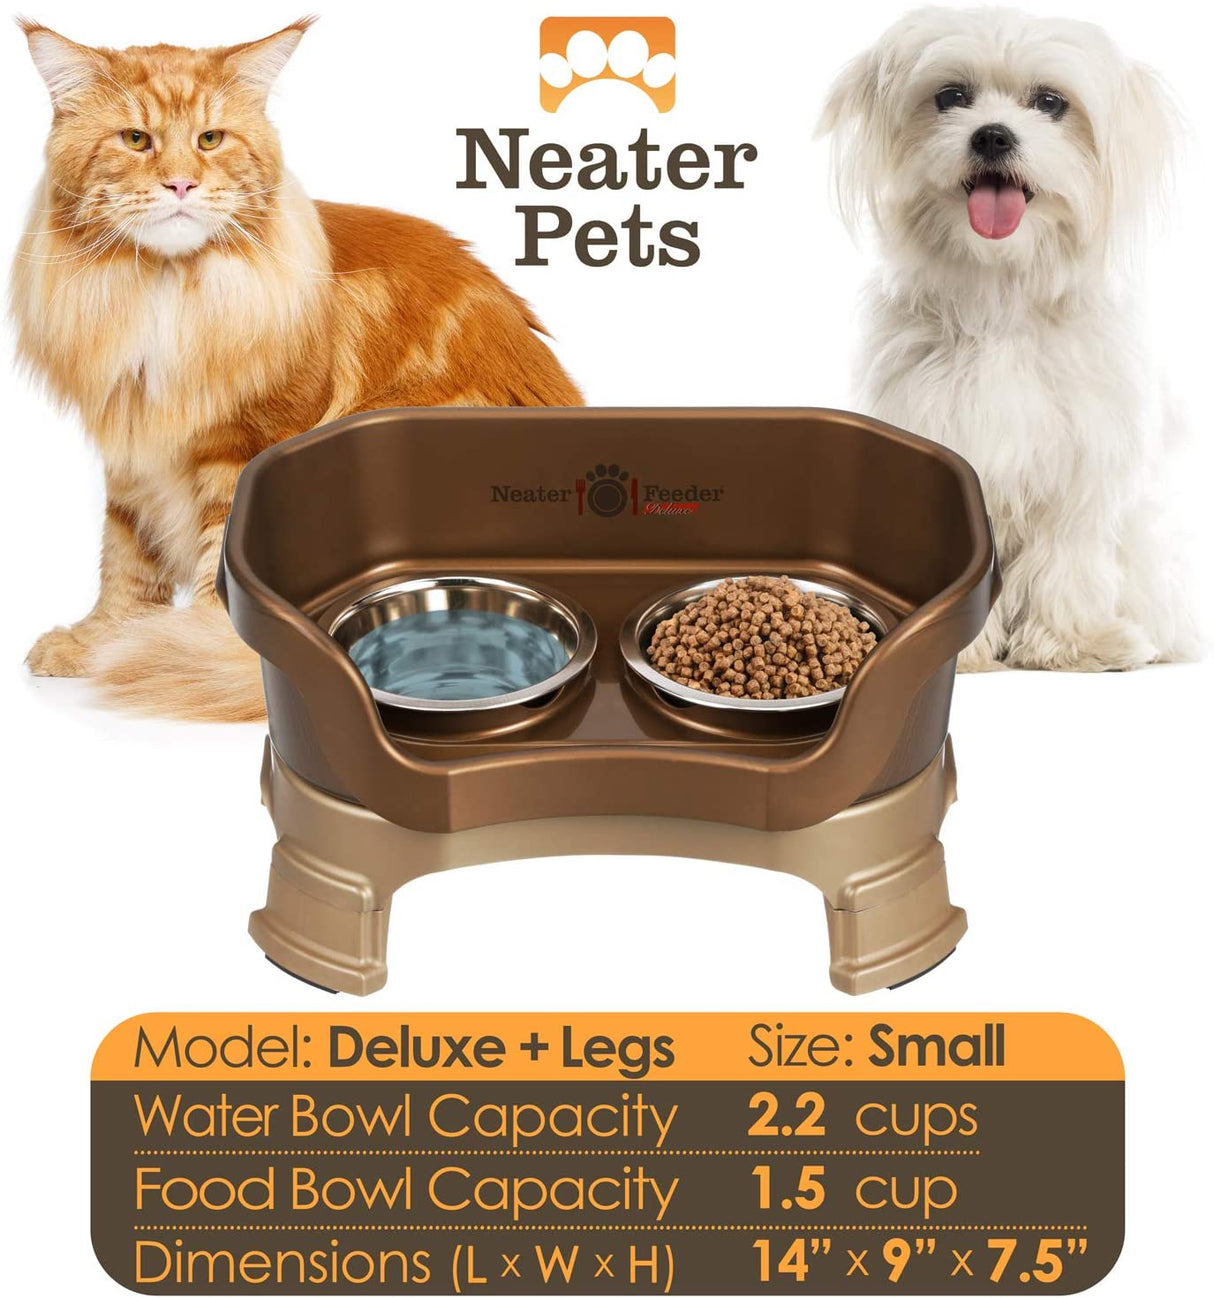 DELUXE Neater Feeder for Cats